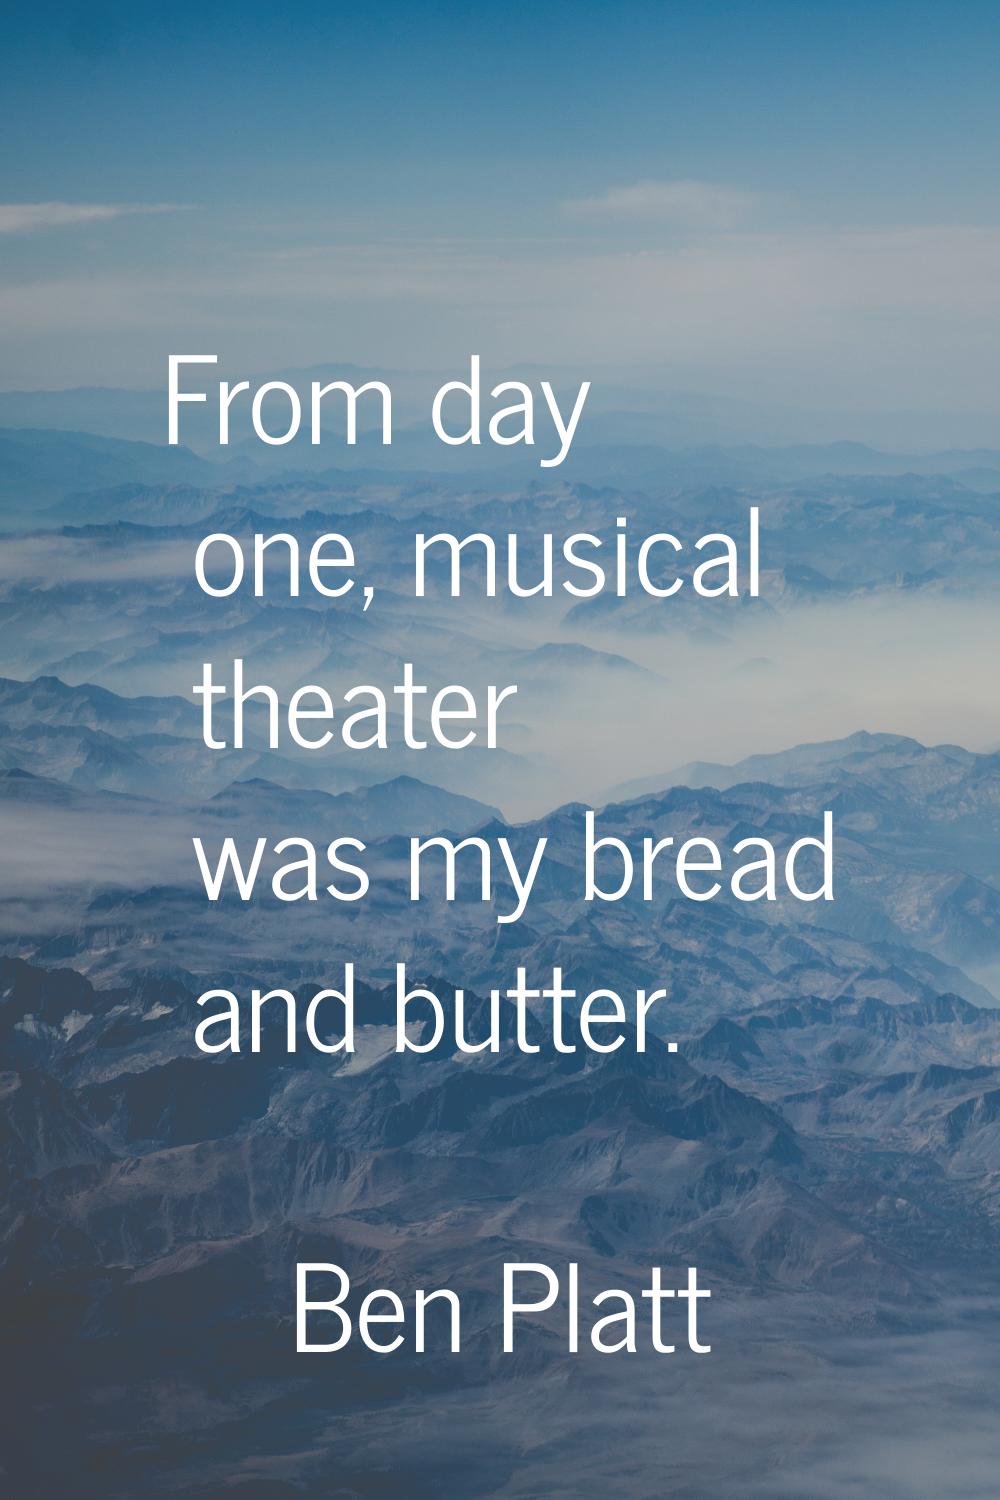 From day one, musical theater was my bread and butter.